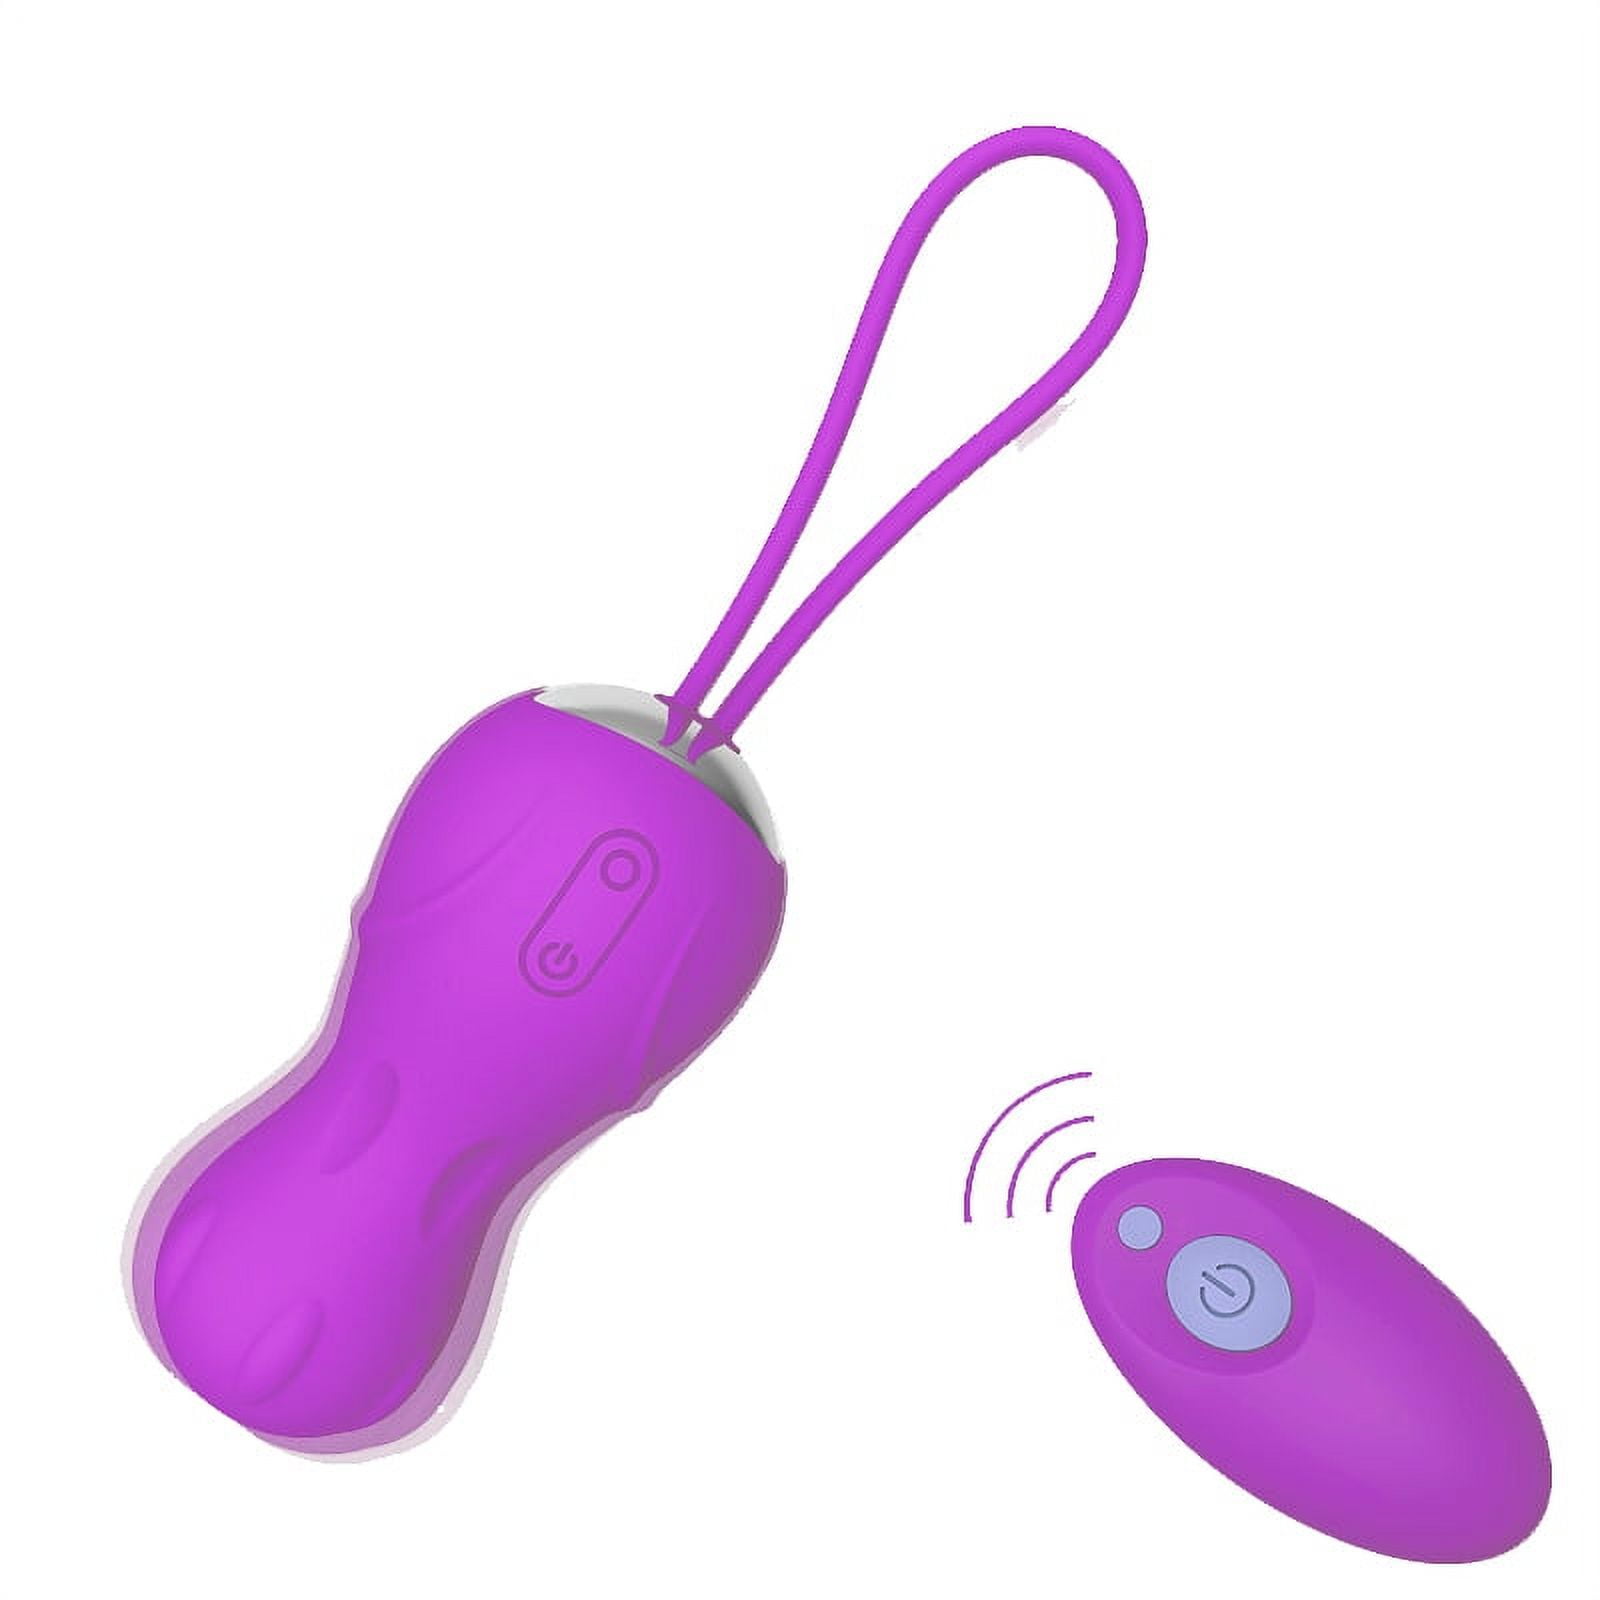 TAQU 10 Vibration Mode Couple Toys with Remote Control(Pink) 